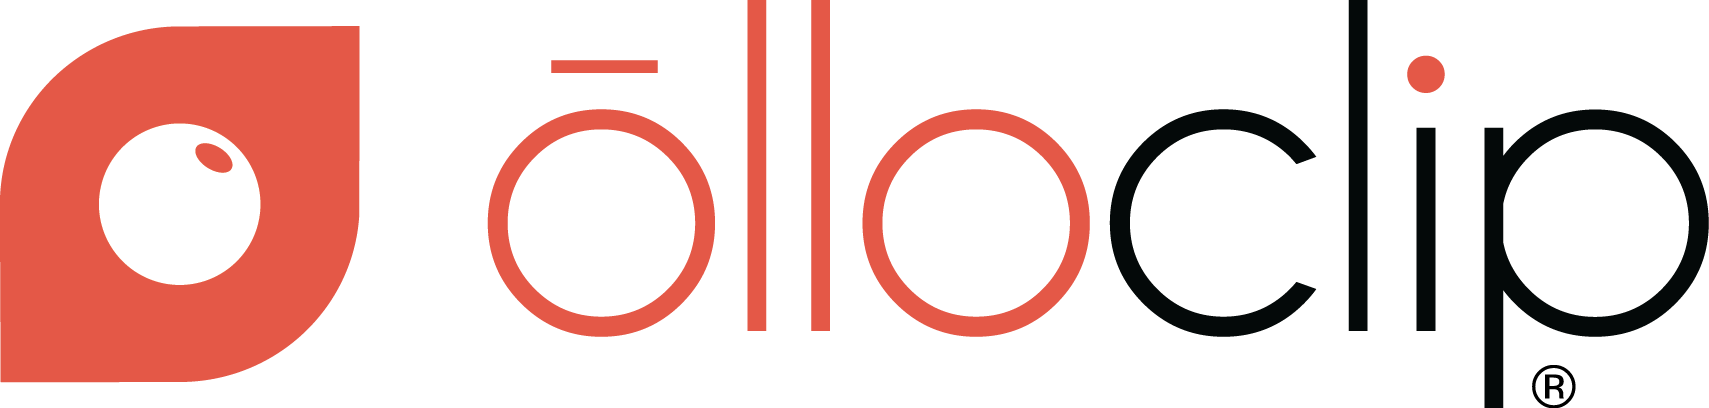 olloclip_newcolor(horizontal).png